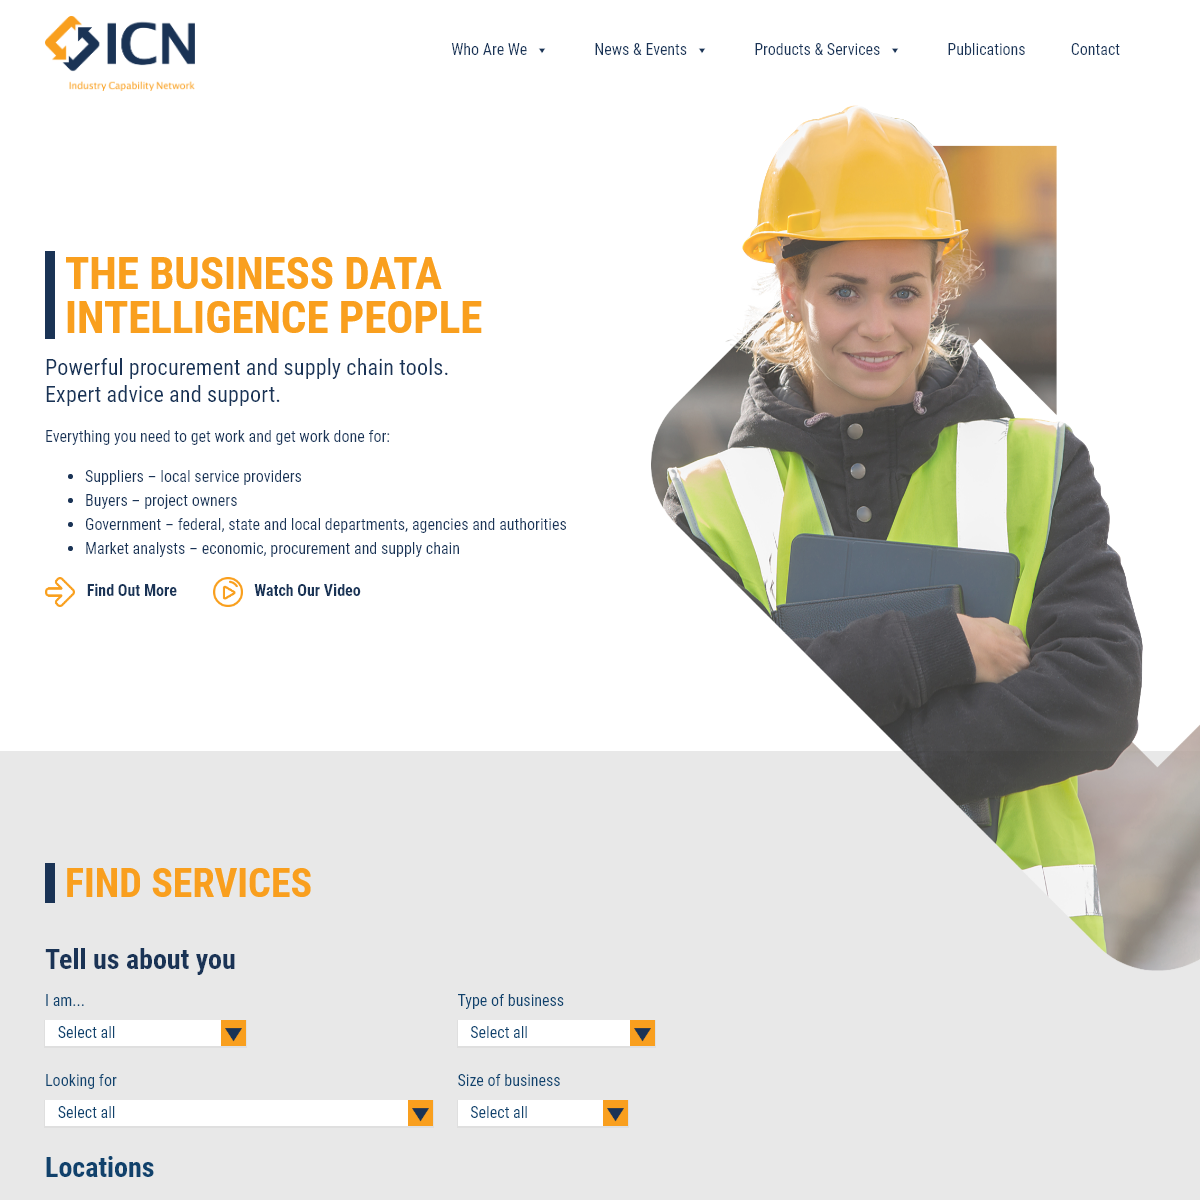 A complete backup of icn.org.au